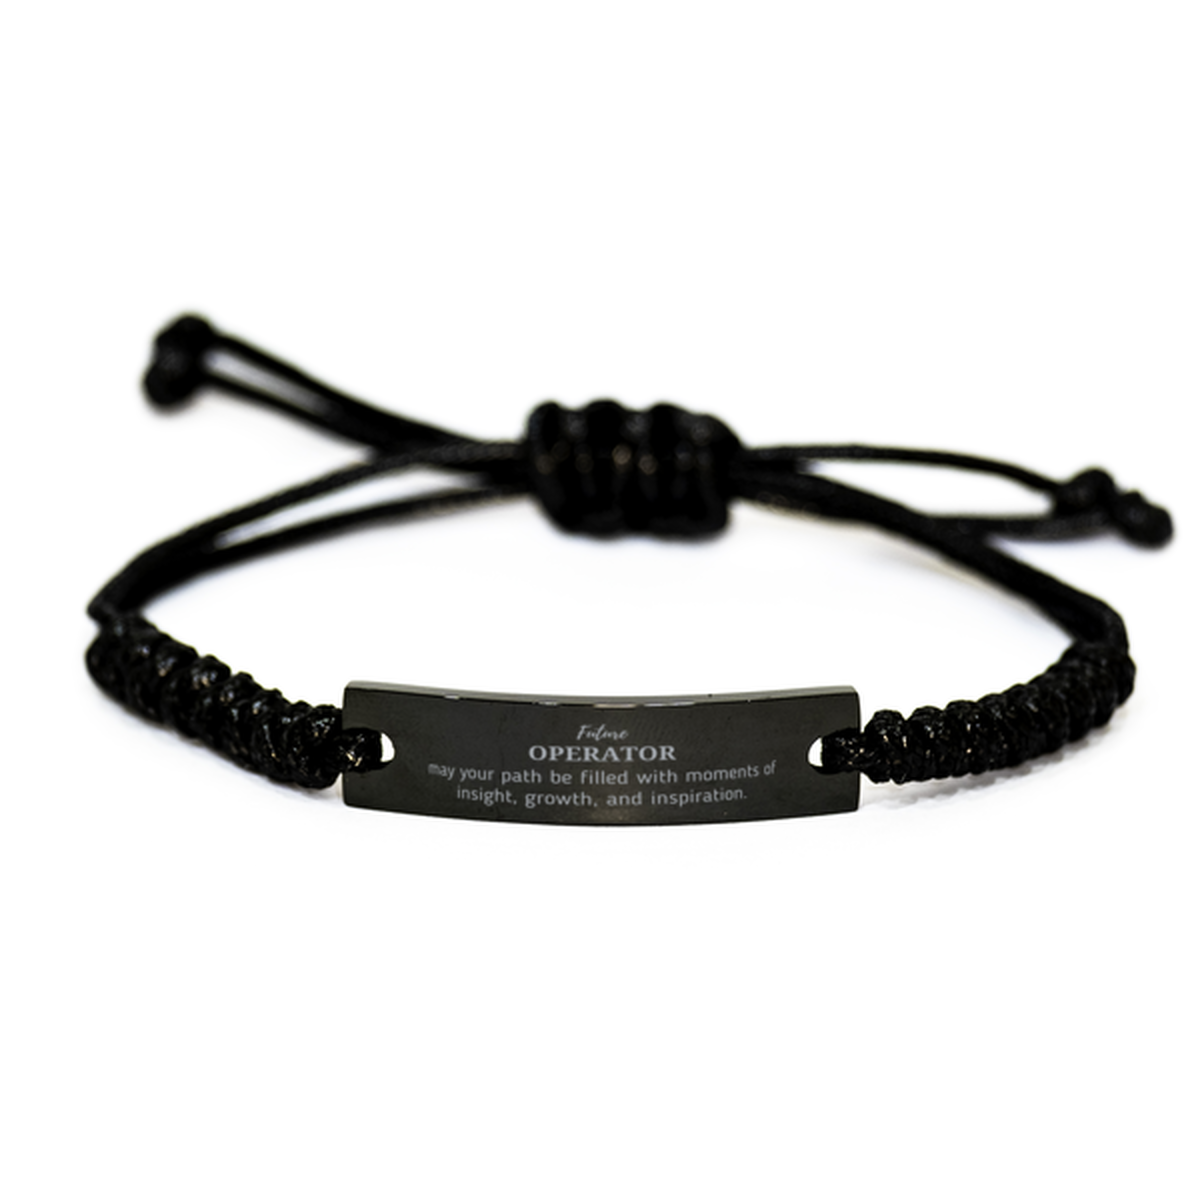 Future Operator Gifts, May your path be filled with moments of insight, Graduation Gifts for New Operator, Christmas Unique Black Rope Bracelet For Men, Women, Friends